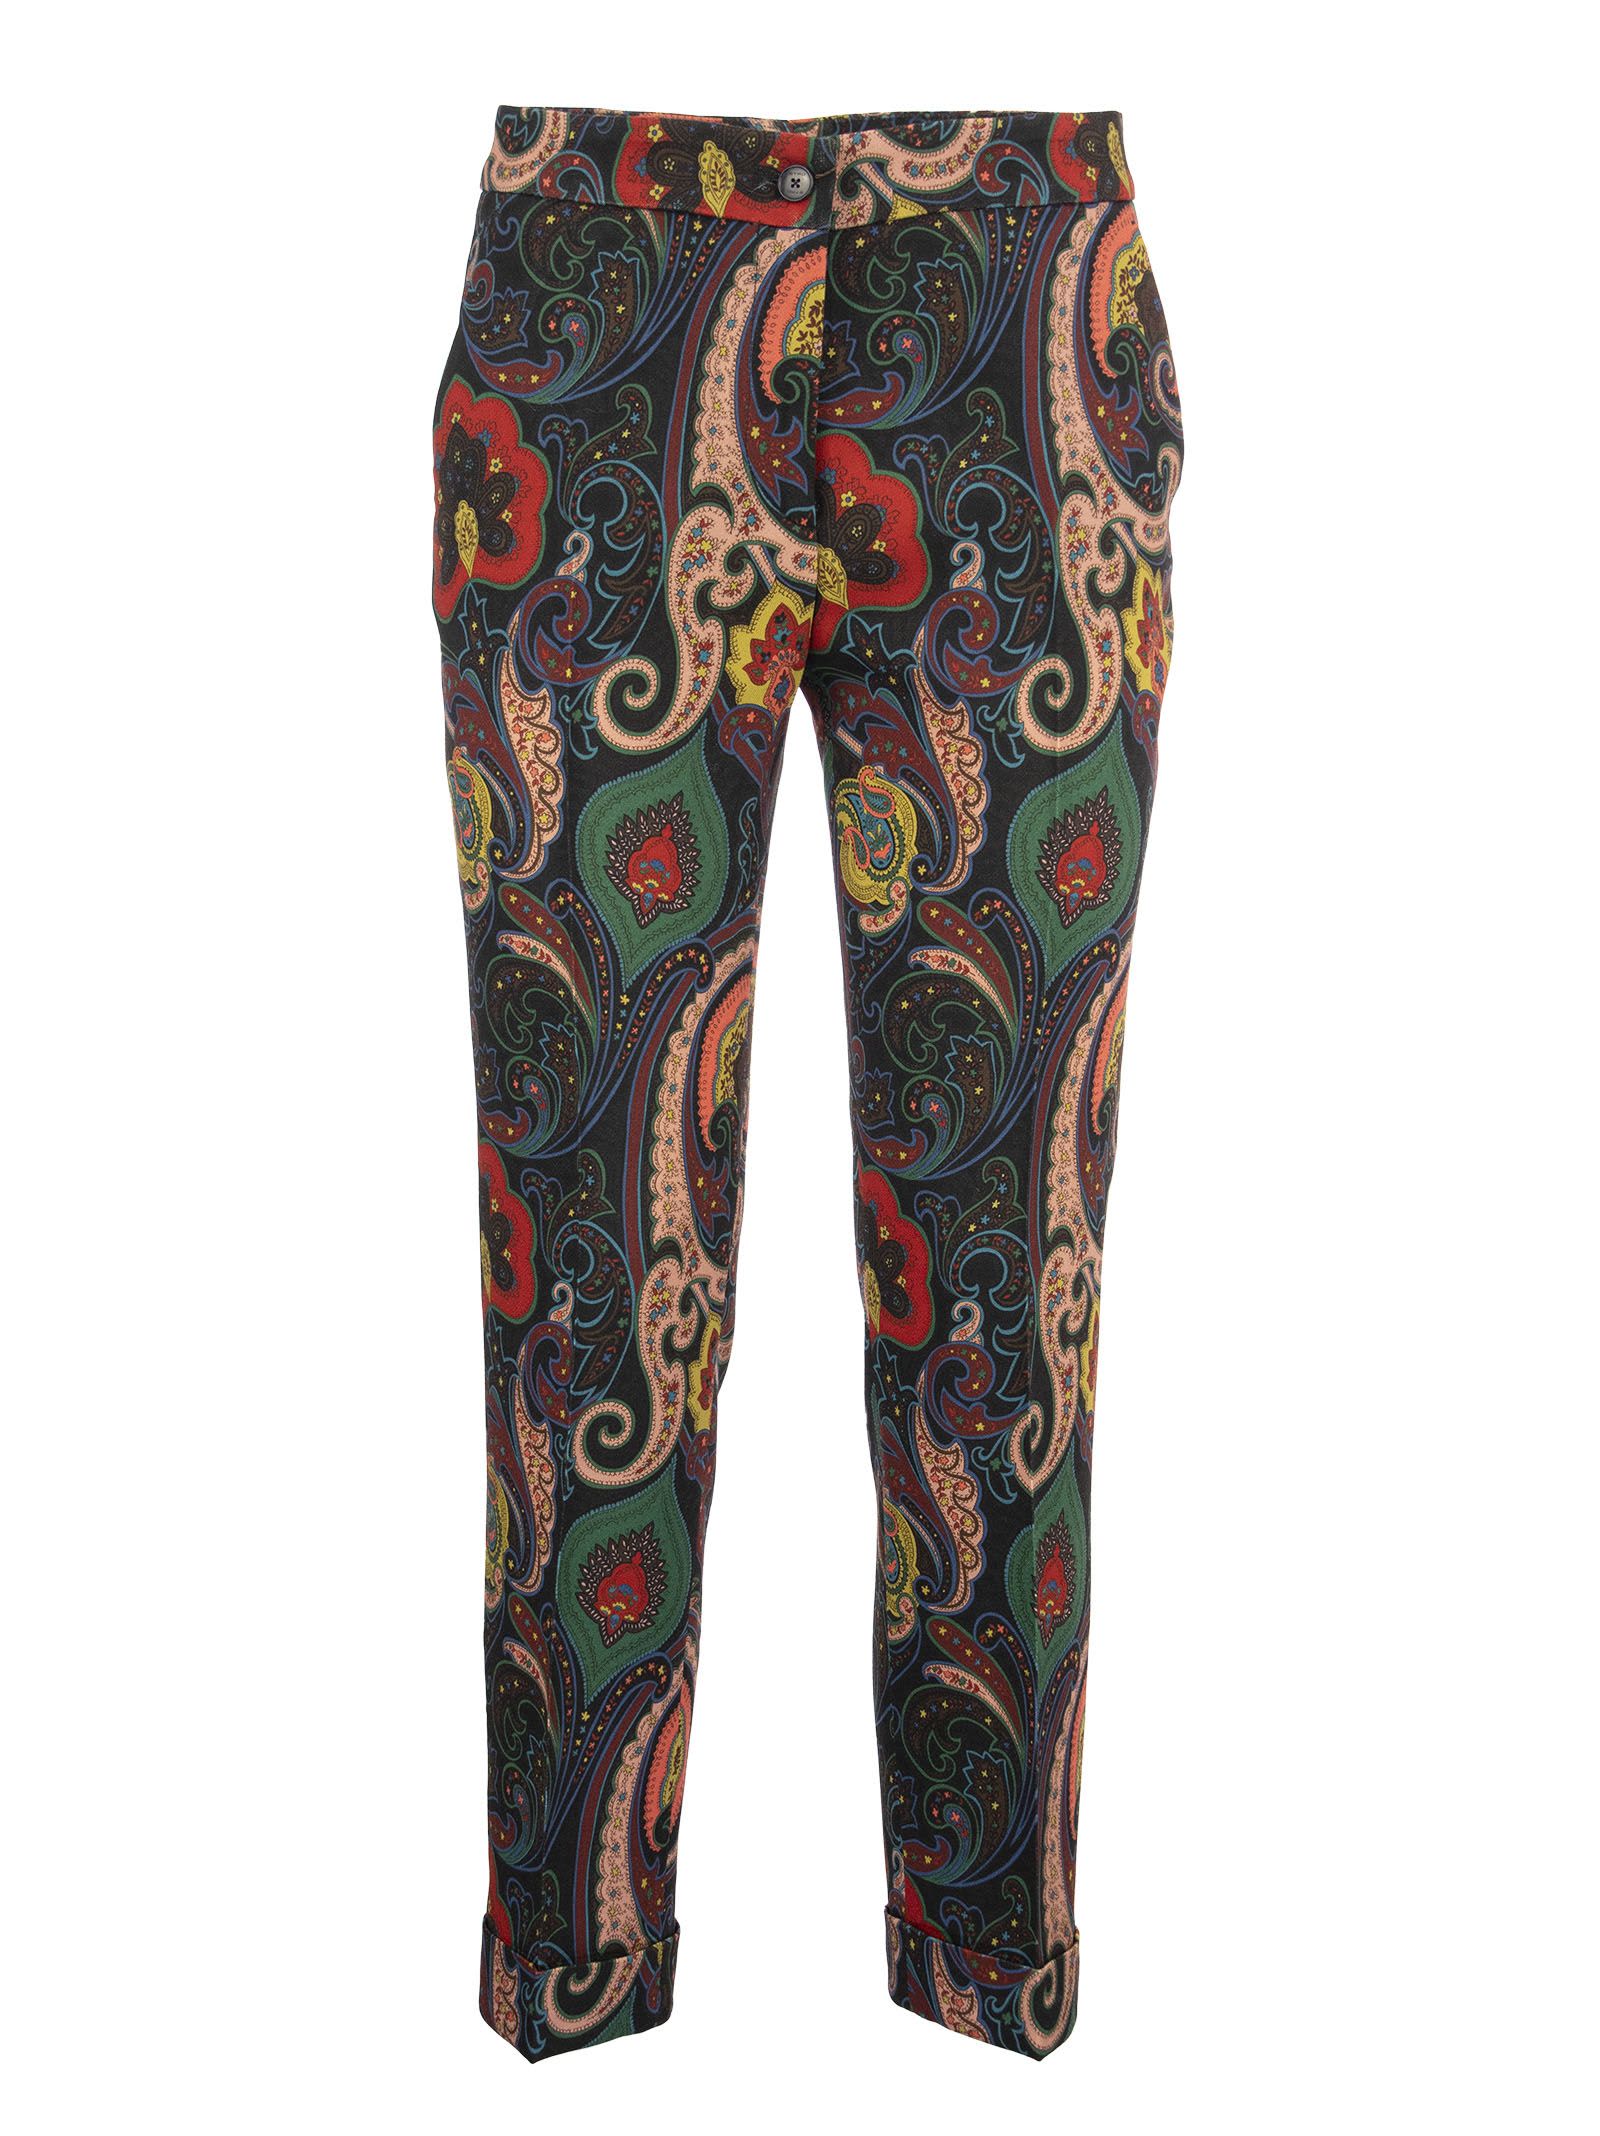 Etro Paisley Patterned Wool Milano Trousers